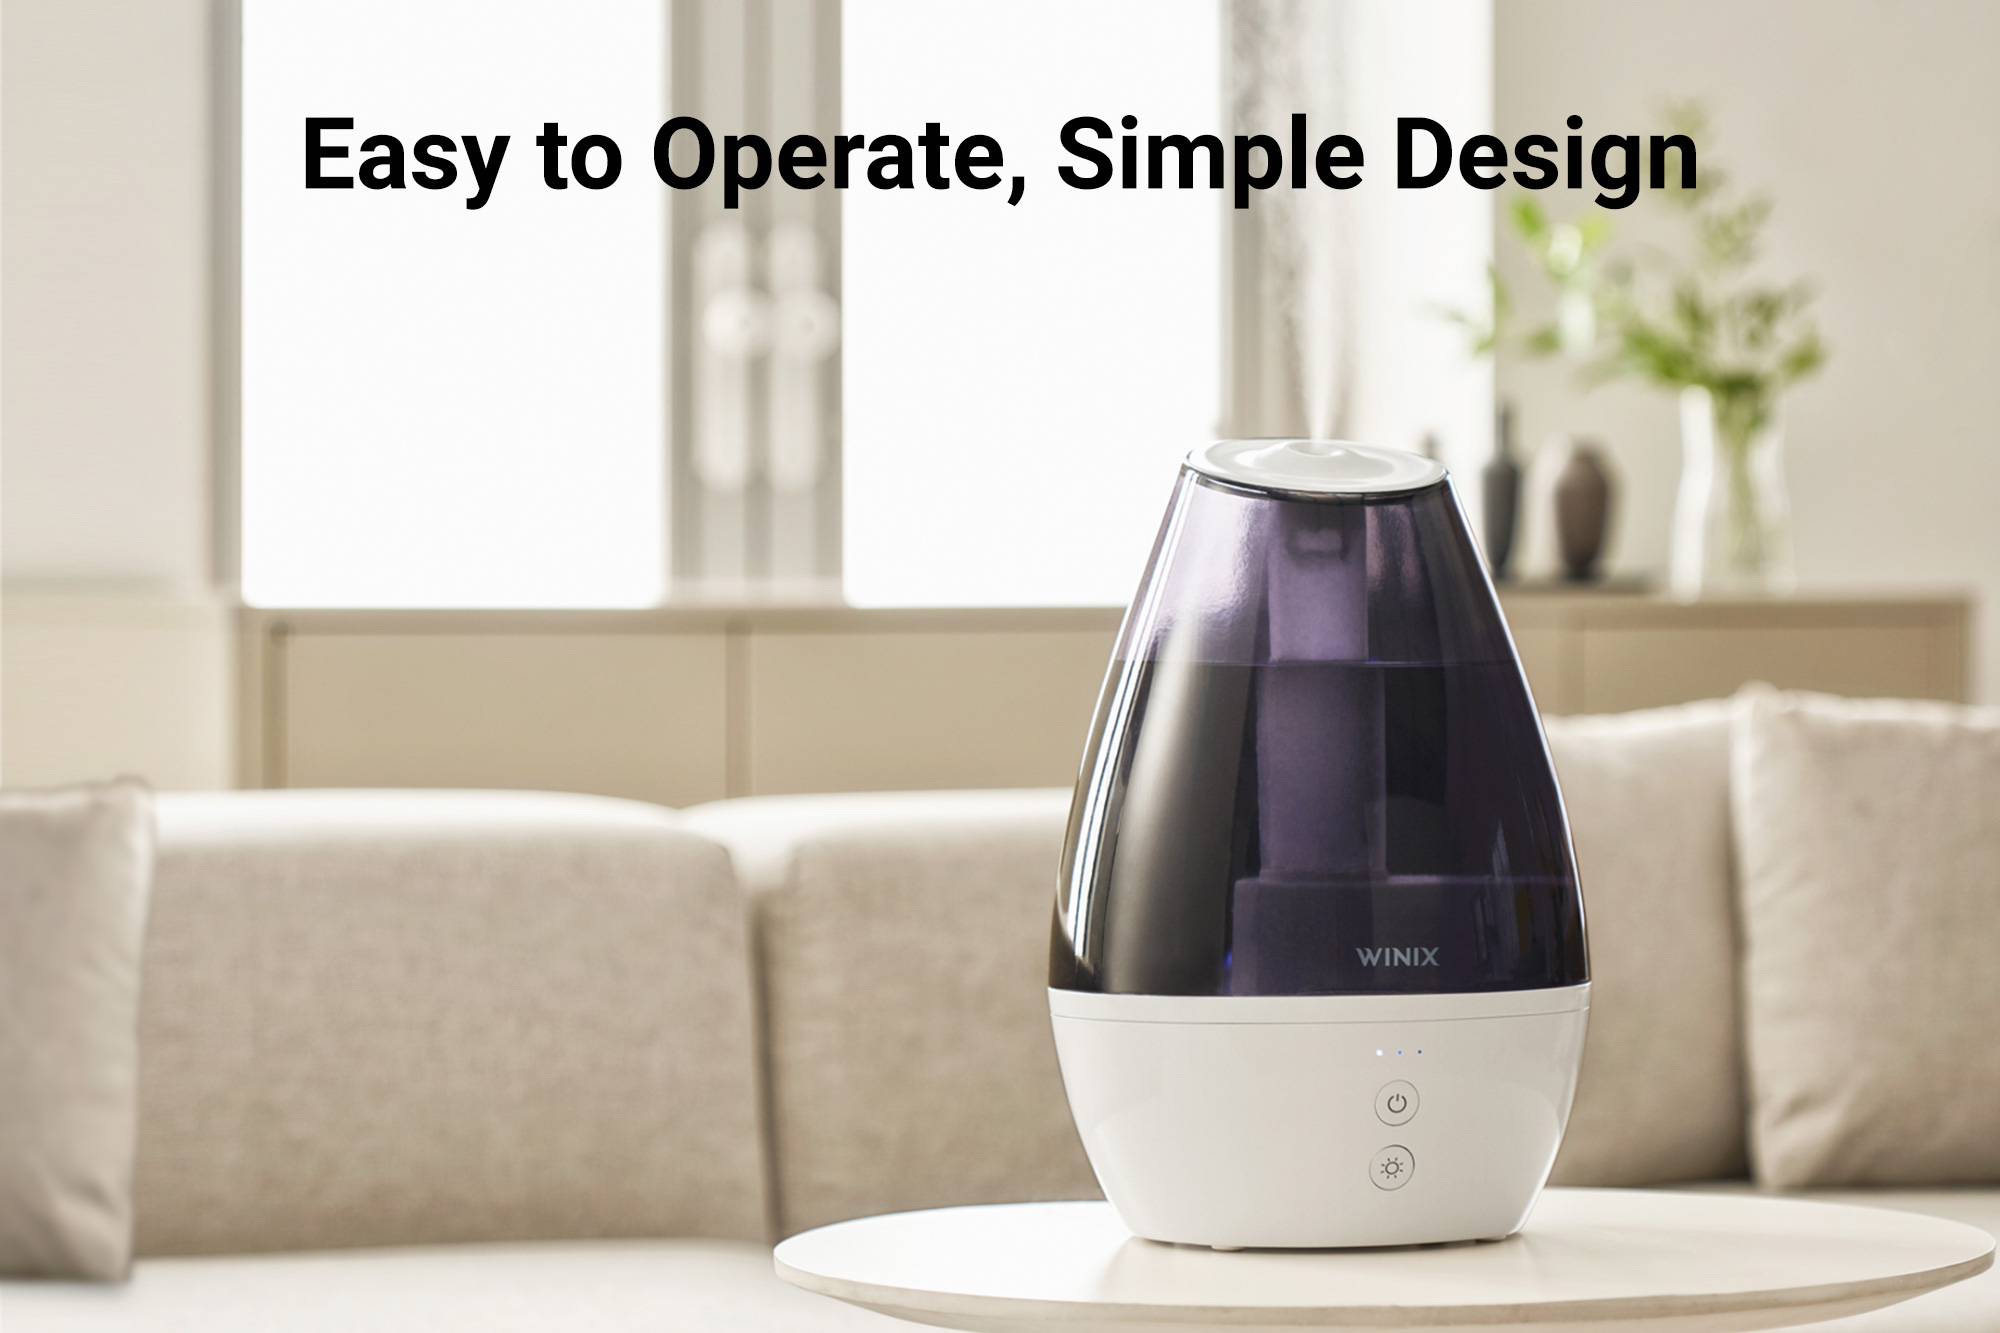 L100 humidifier on coffee table and text saying easy to operate, simple design